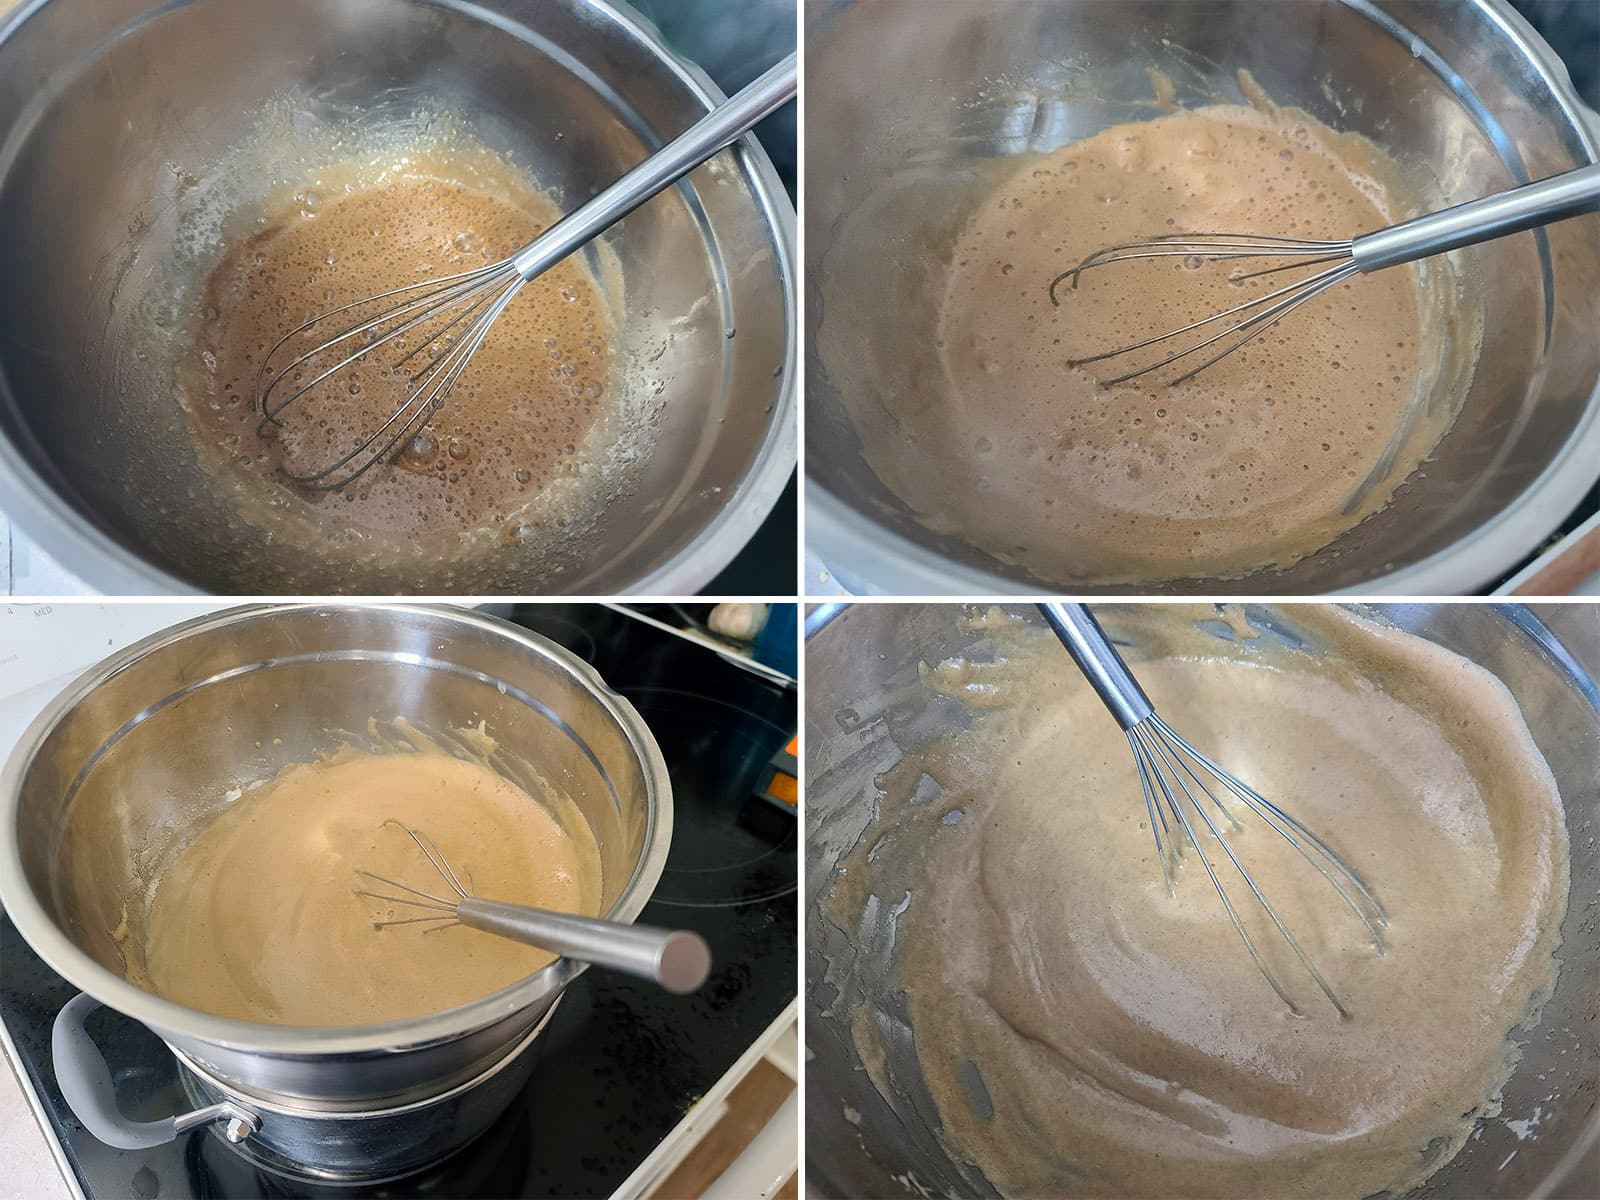 A 4 part image showing the brown sugar meringue being cooked over a double boiler.